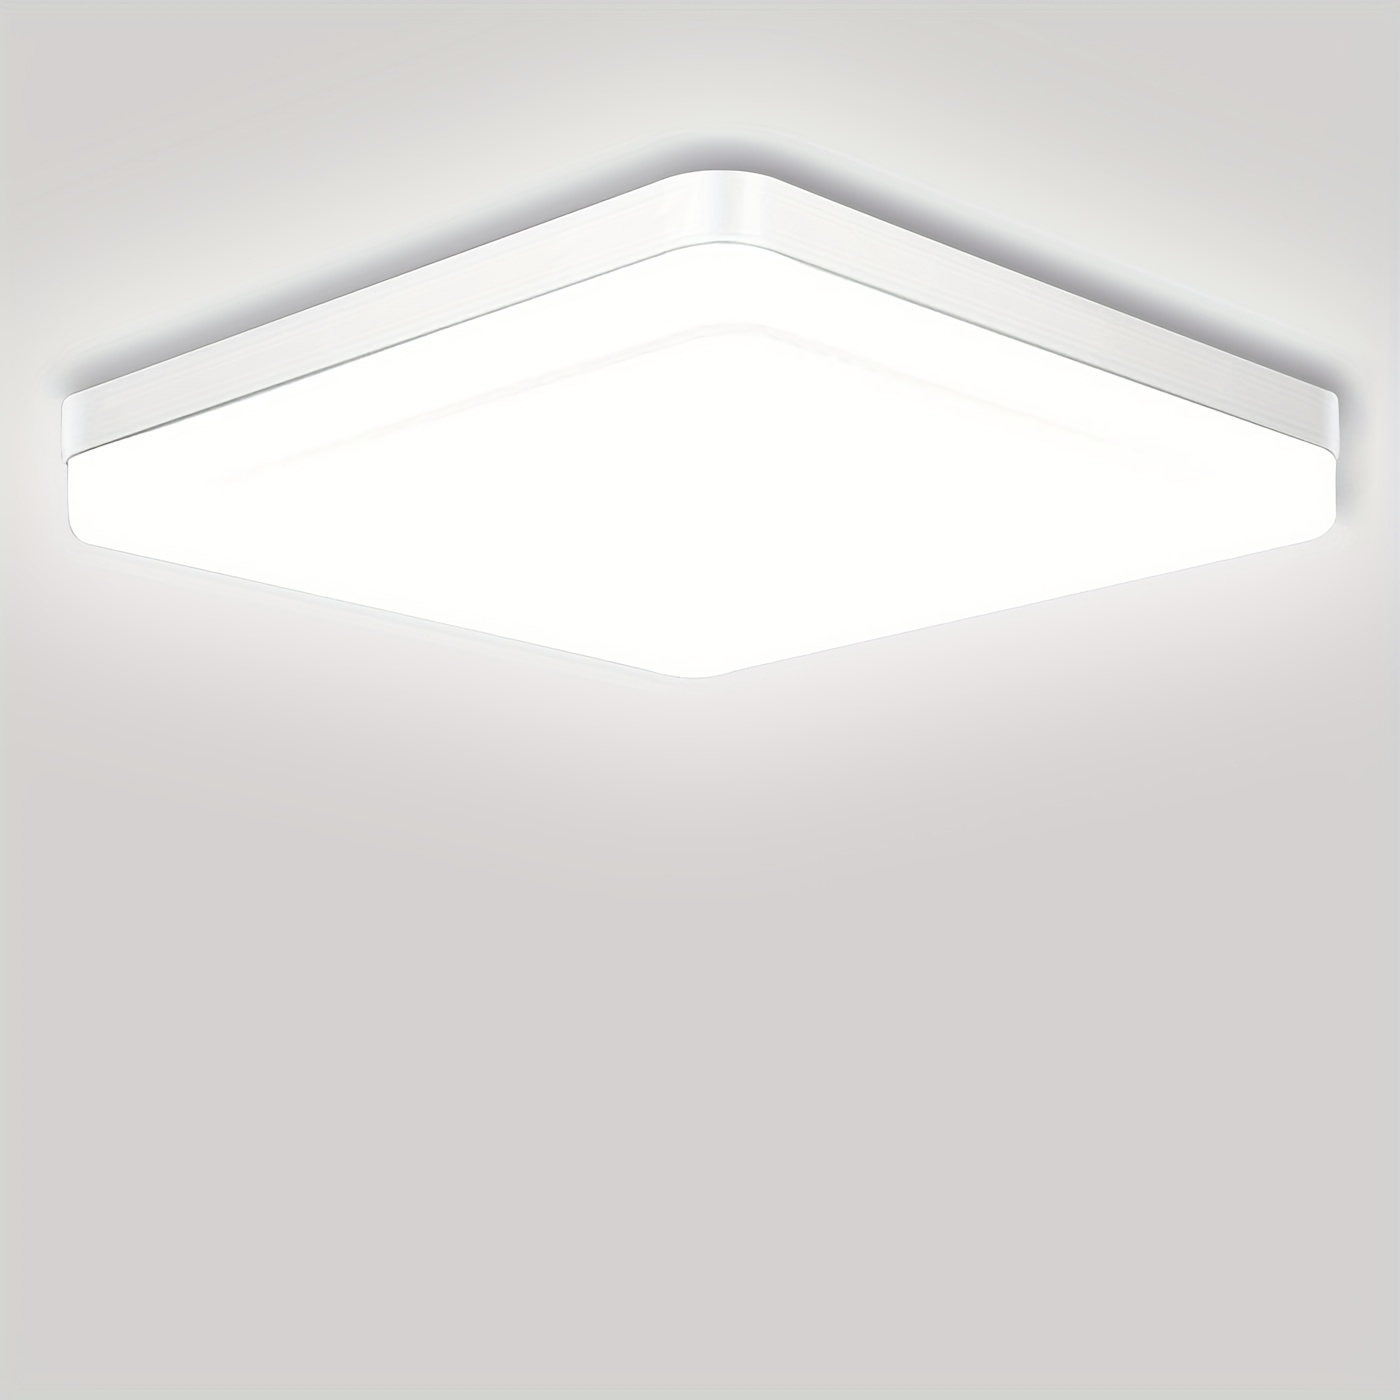 

1pc Led Ceiling Light, 36w 3240lm 4000k 9inch Square Led Flush Mount Ceiling Lighting Fixture For Kitchen, Bedroom, Living Room, Utility Laundry Closet Room, Natural White